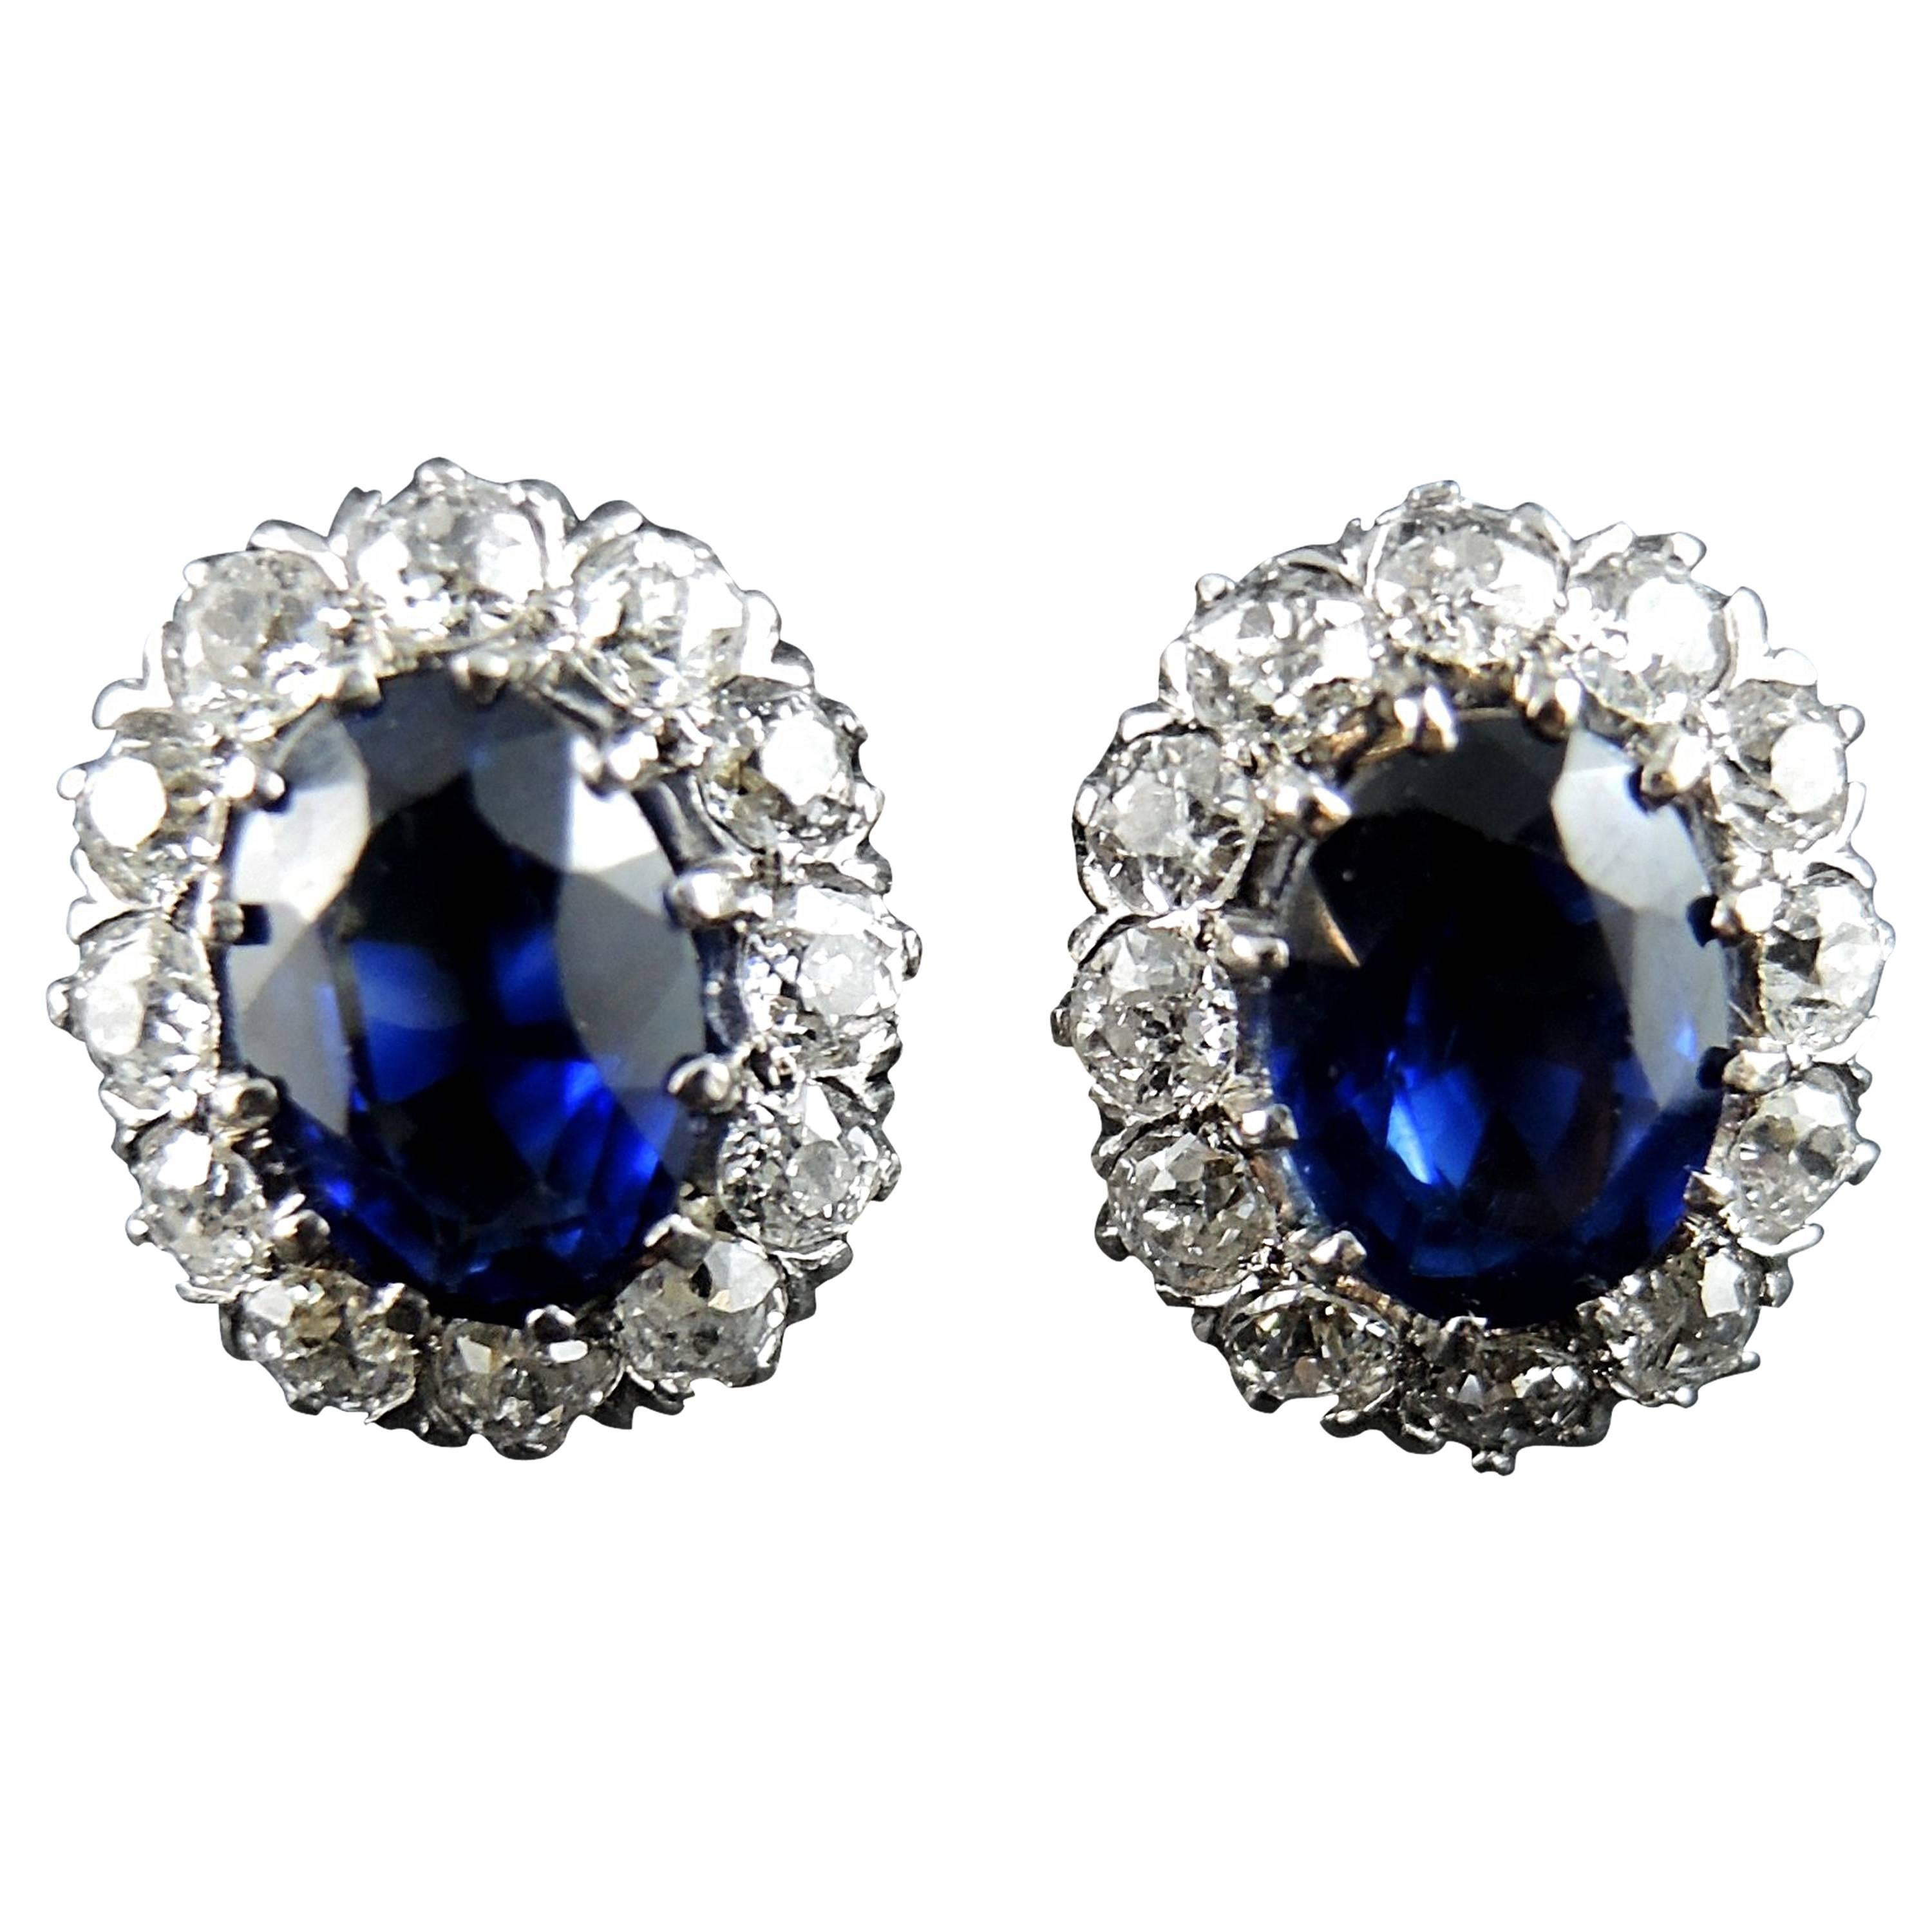 Diamonds And "Royal Blue" Synthetic Sapphire Cluster Earrings For Sale